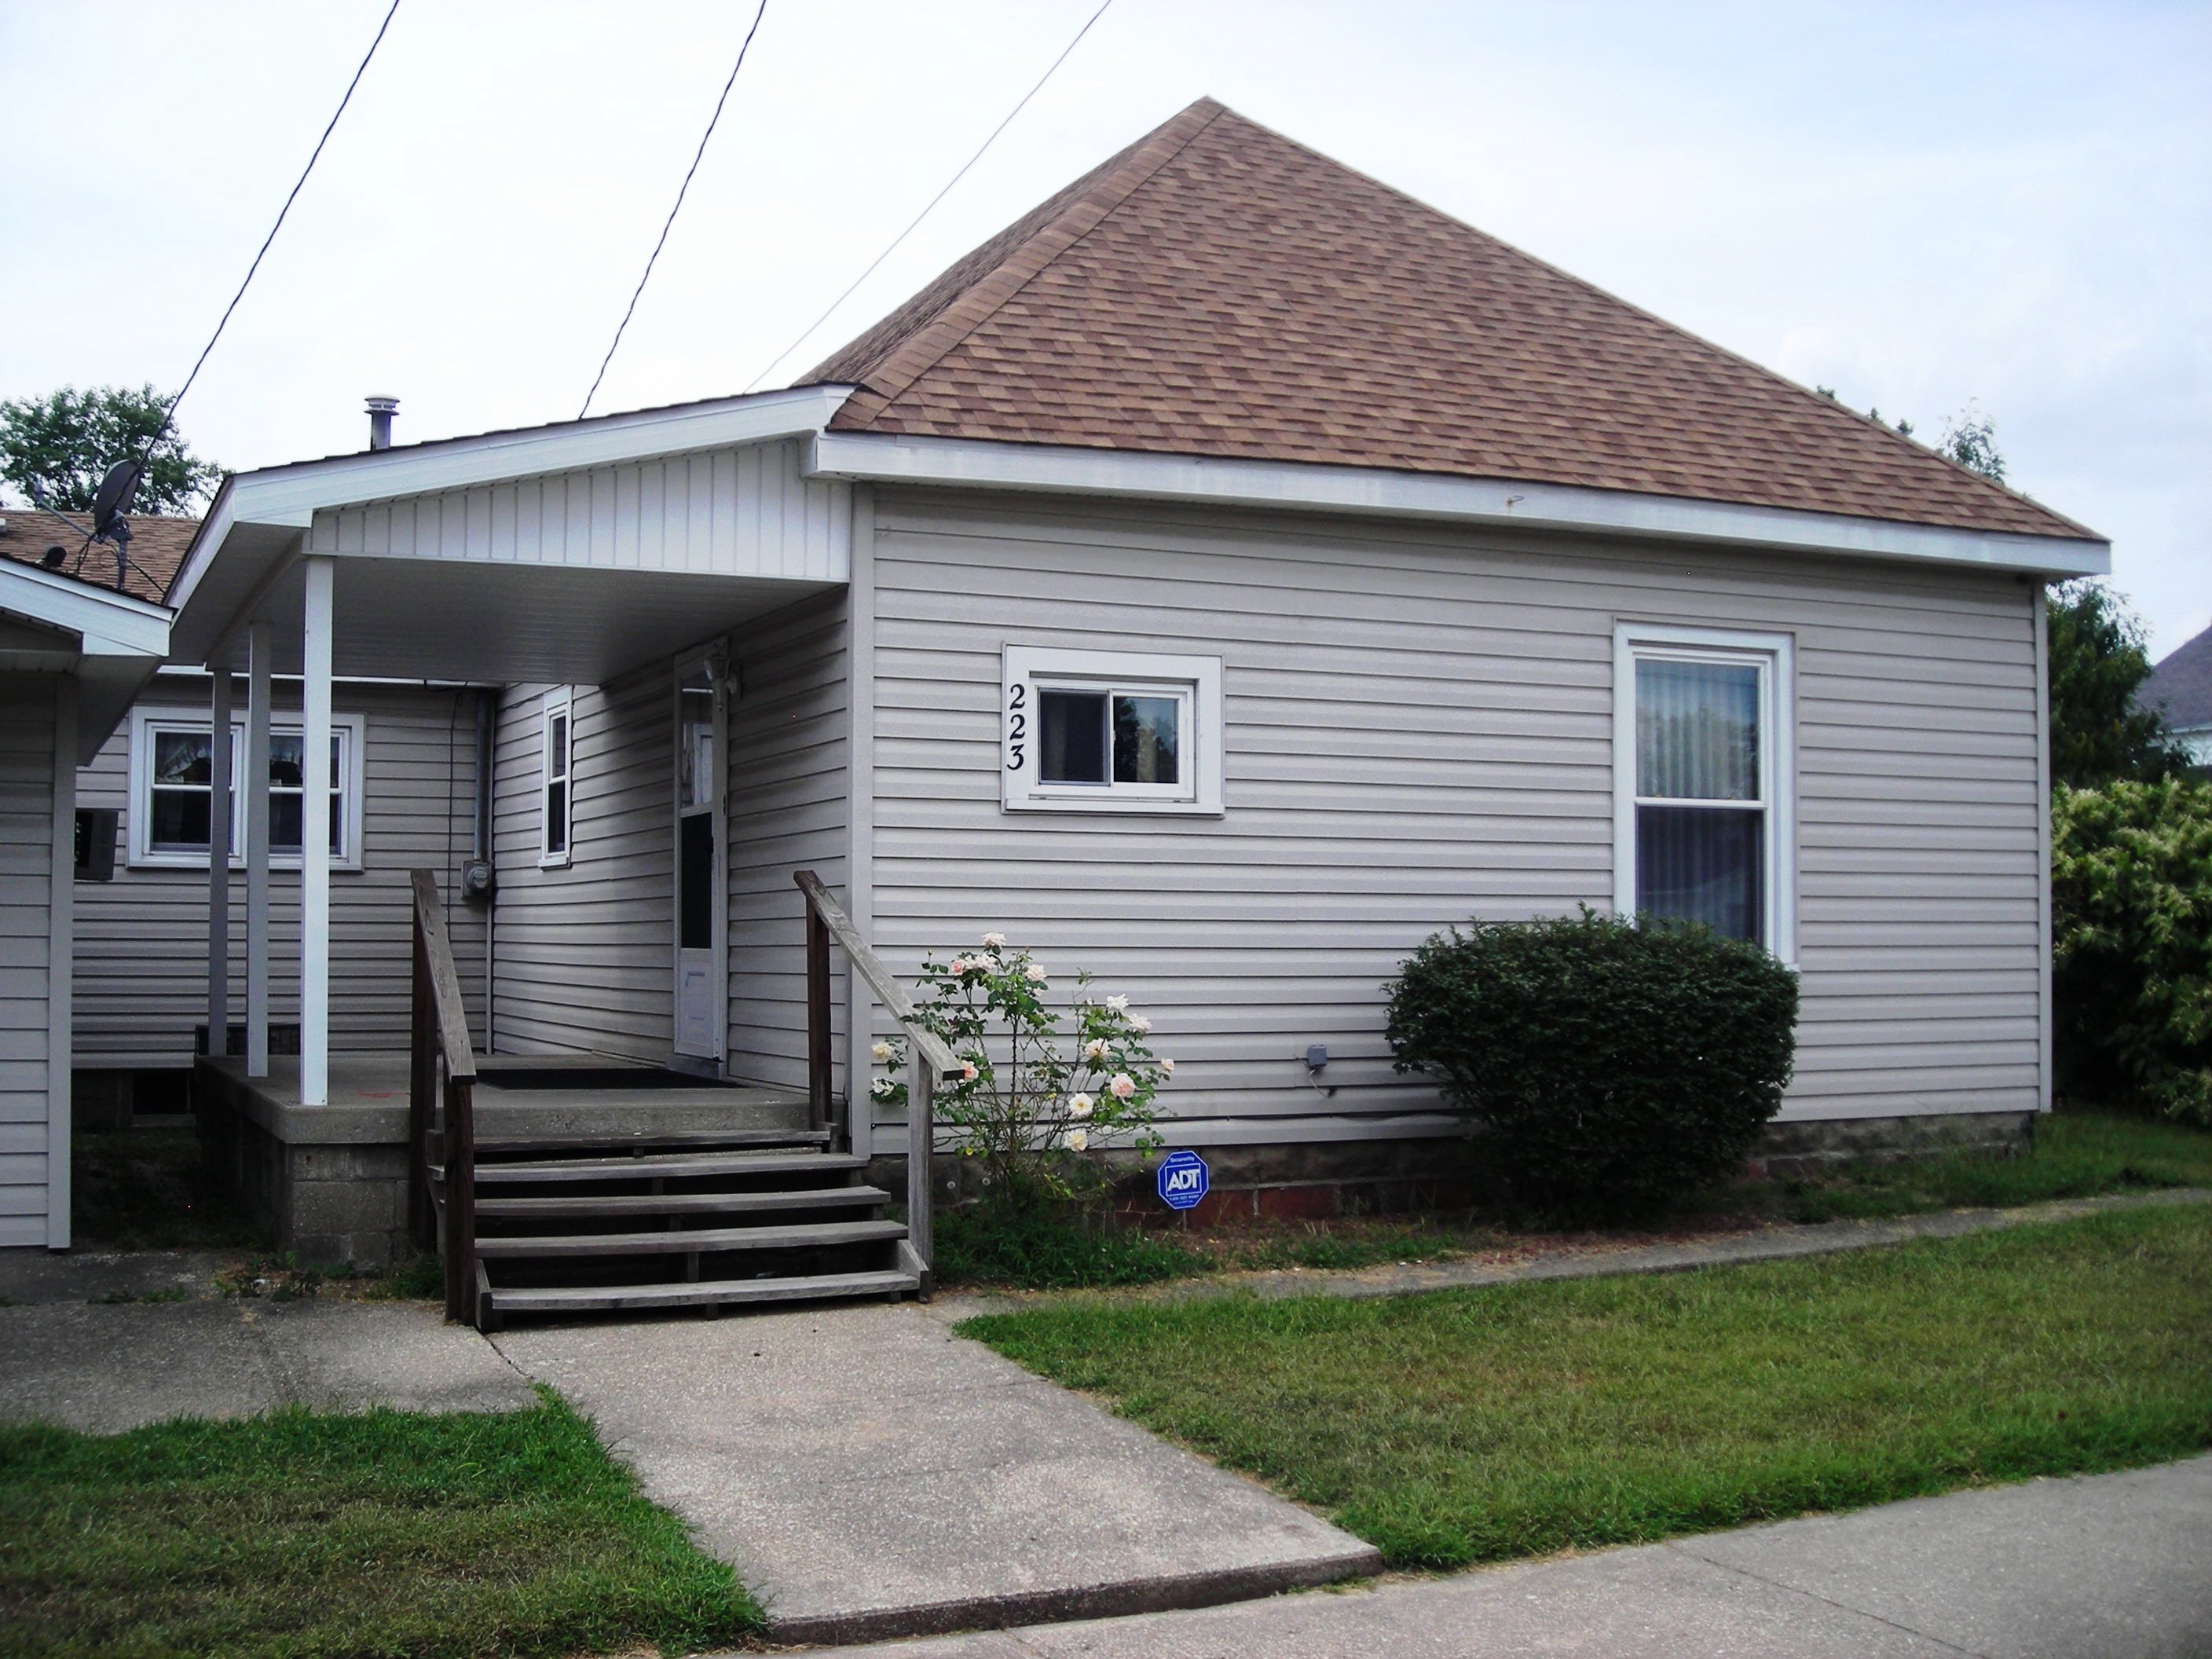  223 S. 3rd St., West Terre Haute, IN photo